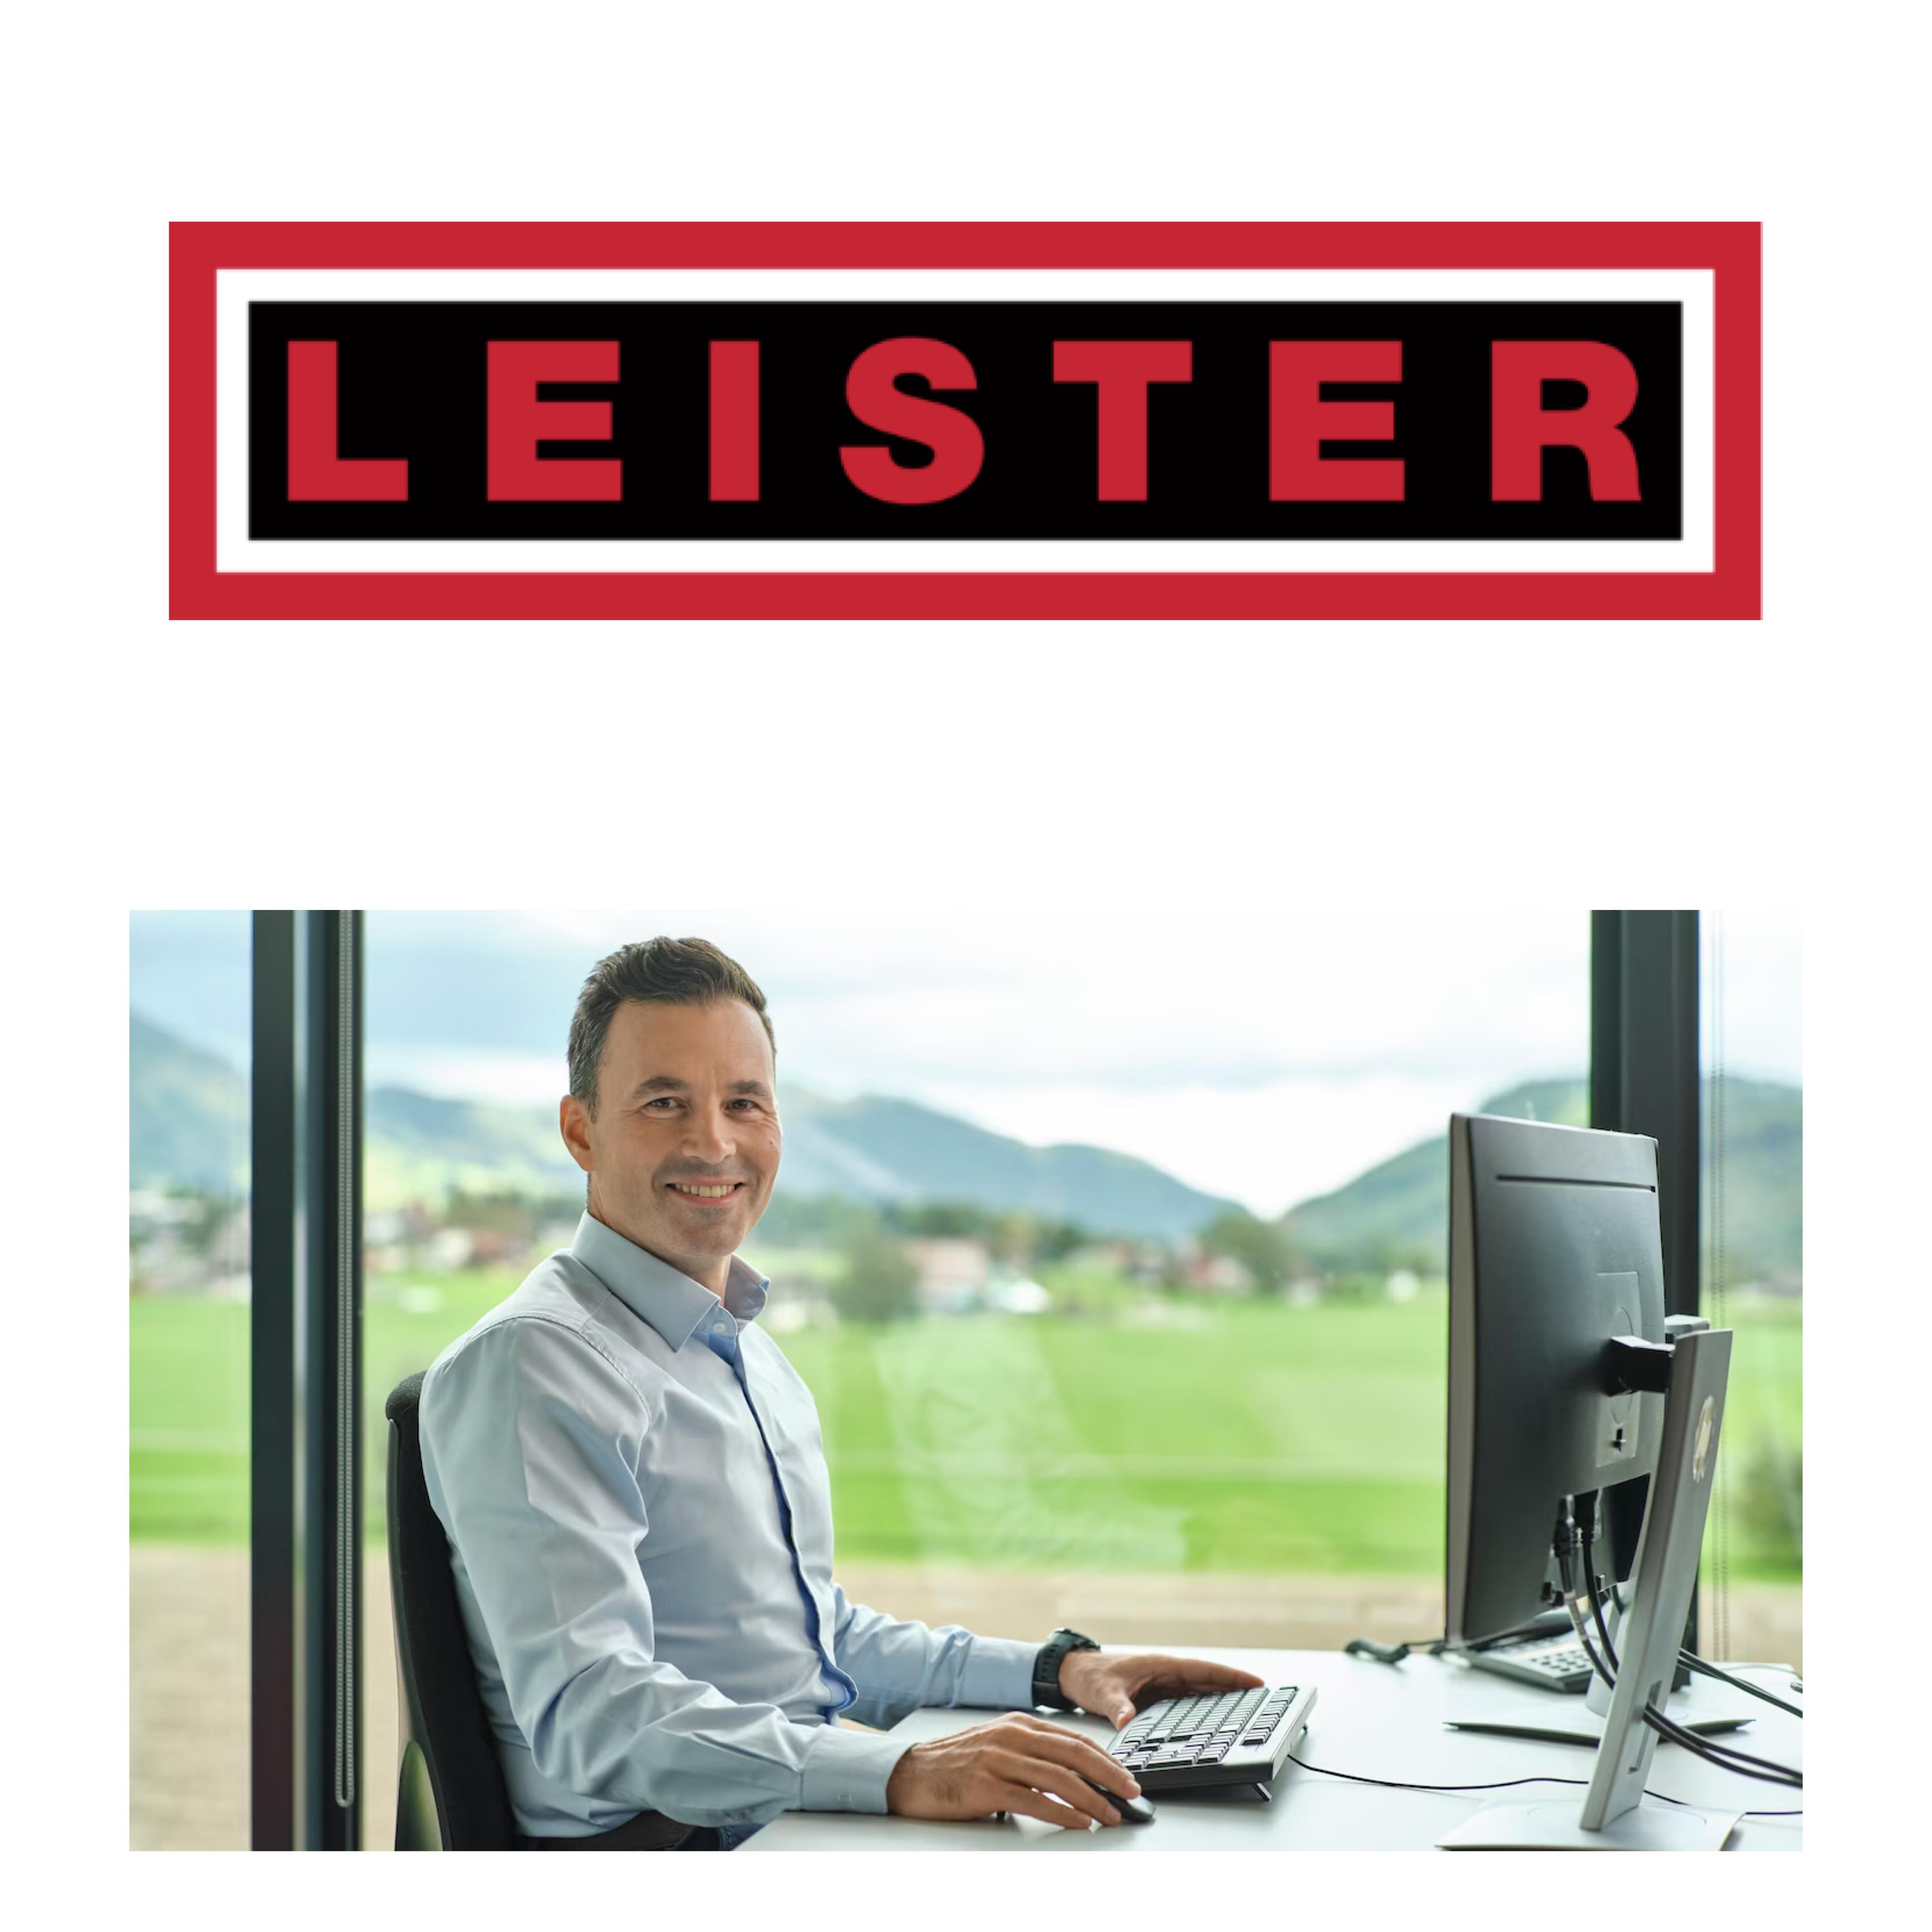 Leister - Technical Sales Support for Roofing (Classified Ad)